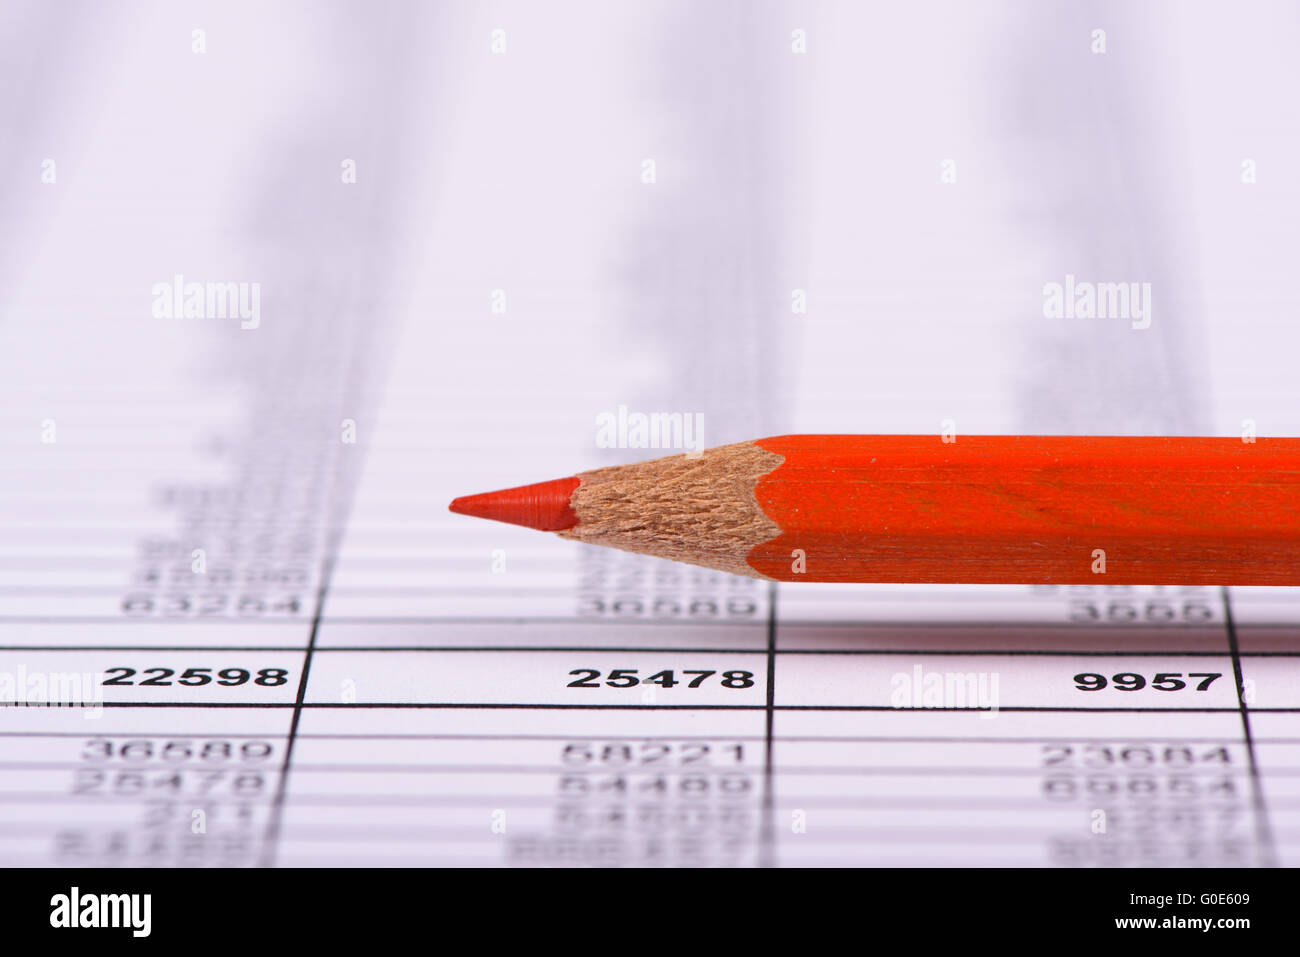 red pencil over banking data Stock Photo